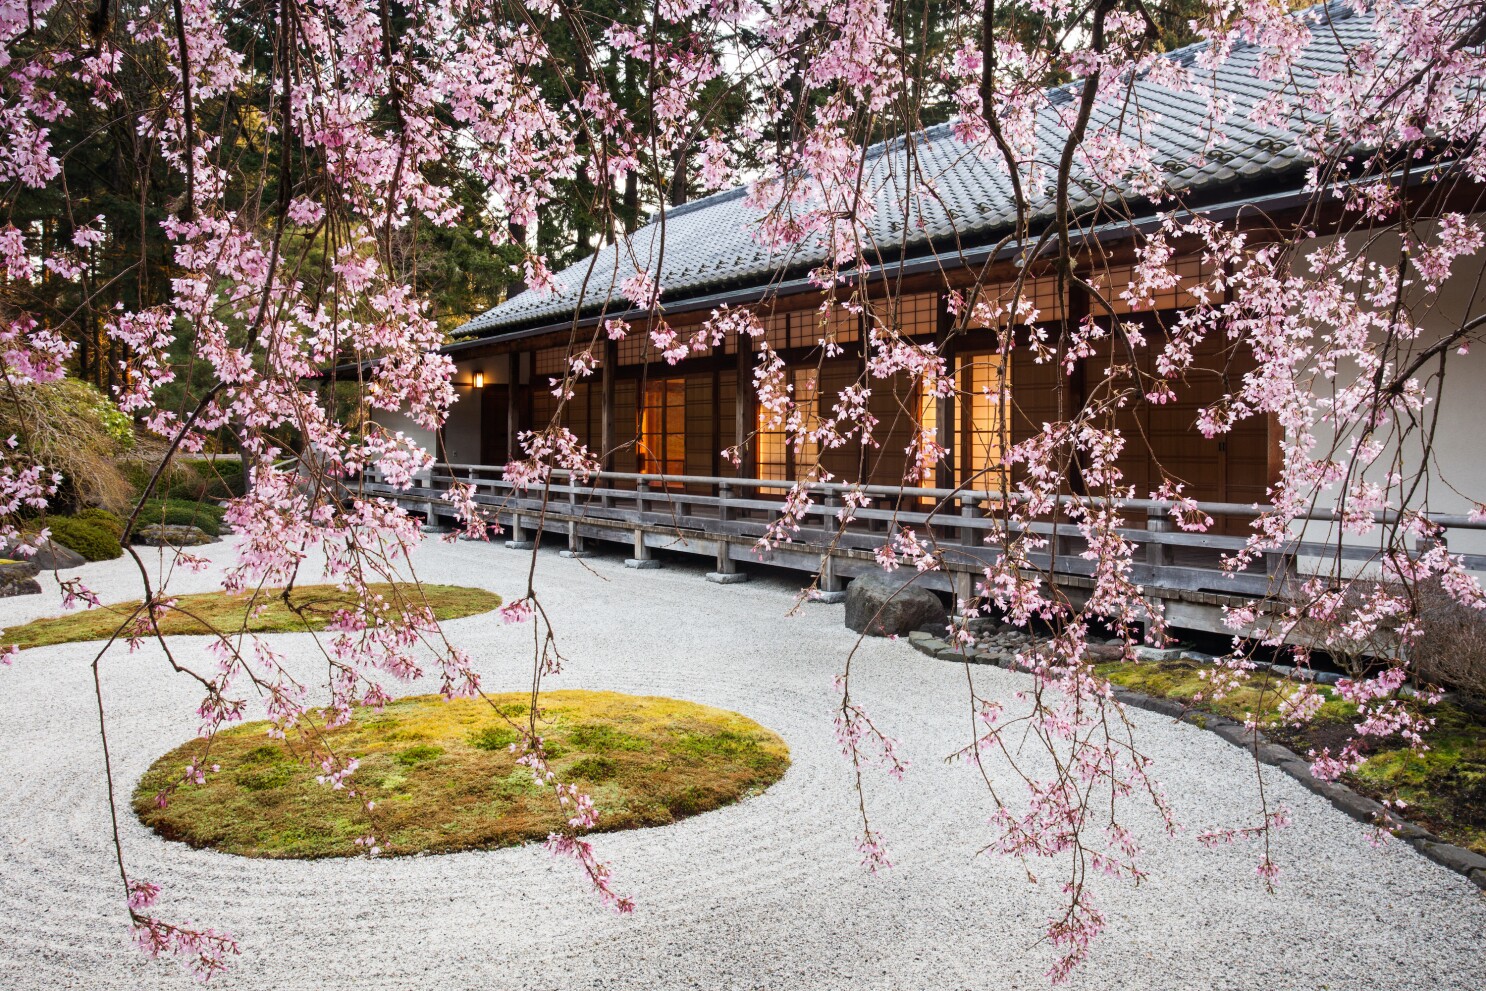 The 8 Best Places to See Cherry Blossoms in the United States